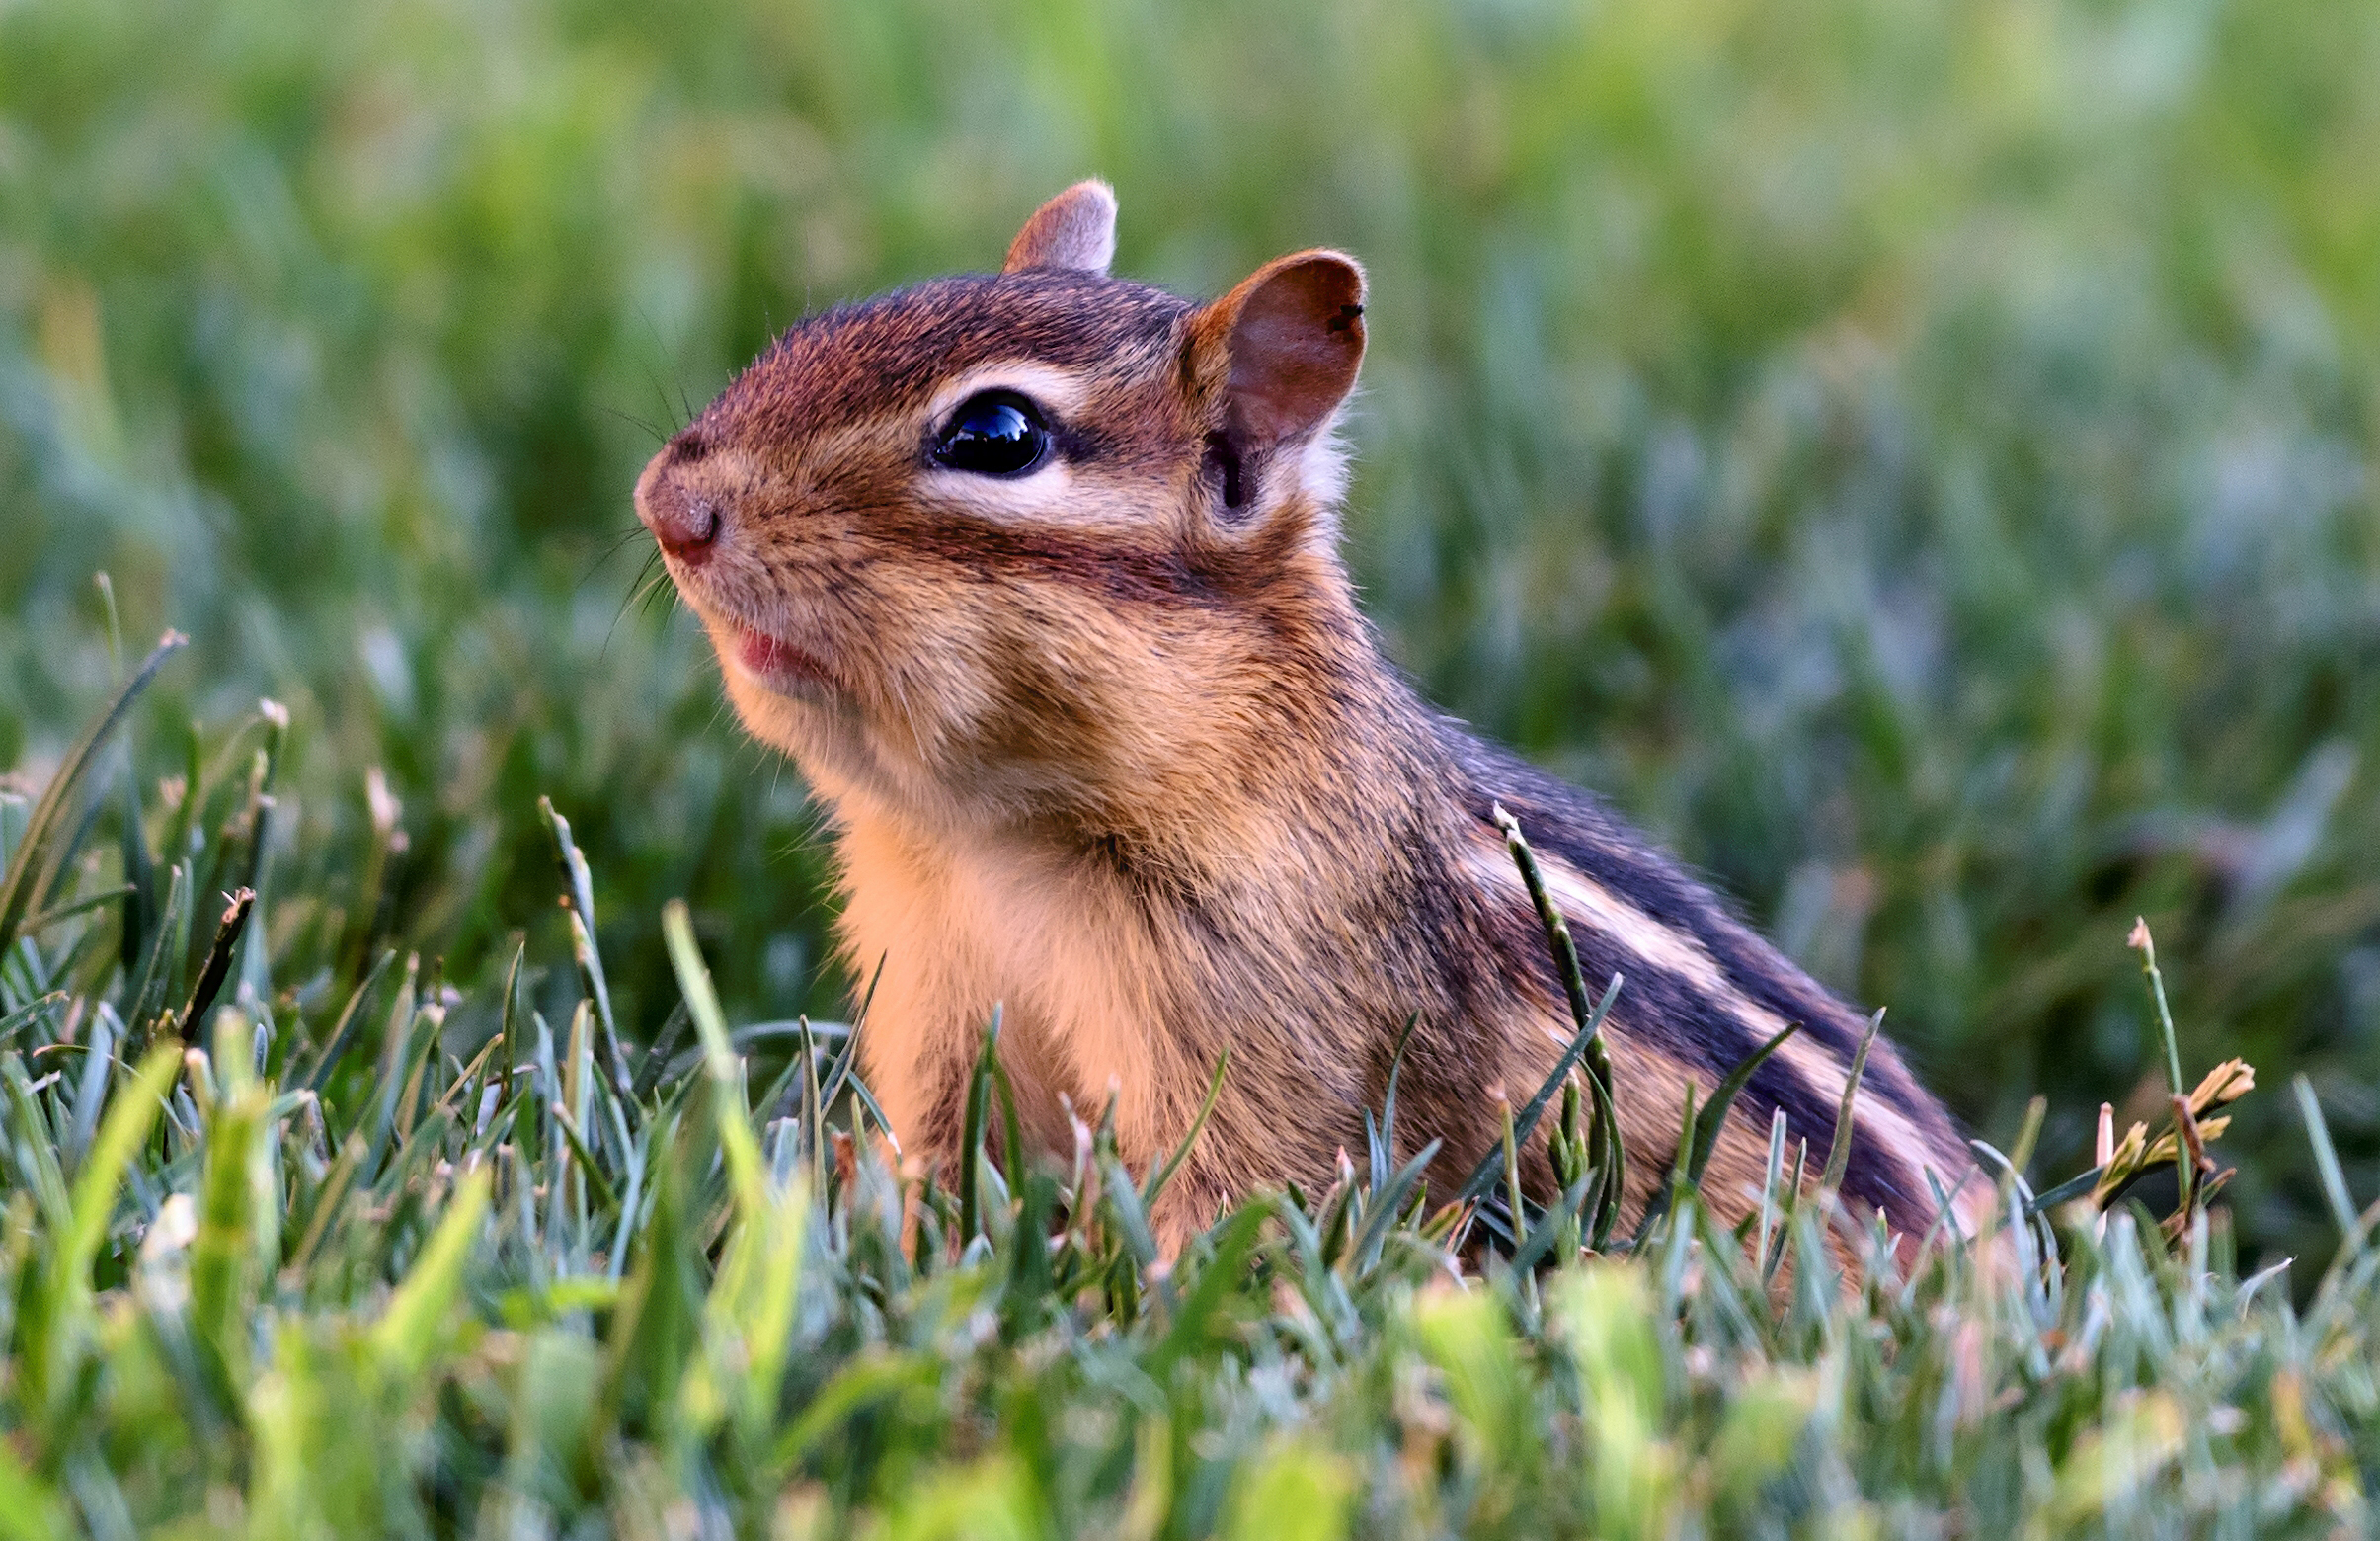  Chipmunk HQ Background Wallpapers